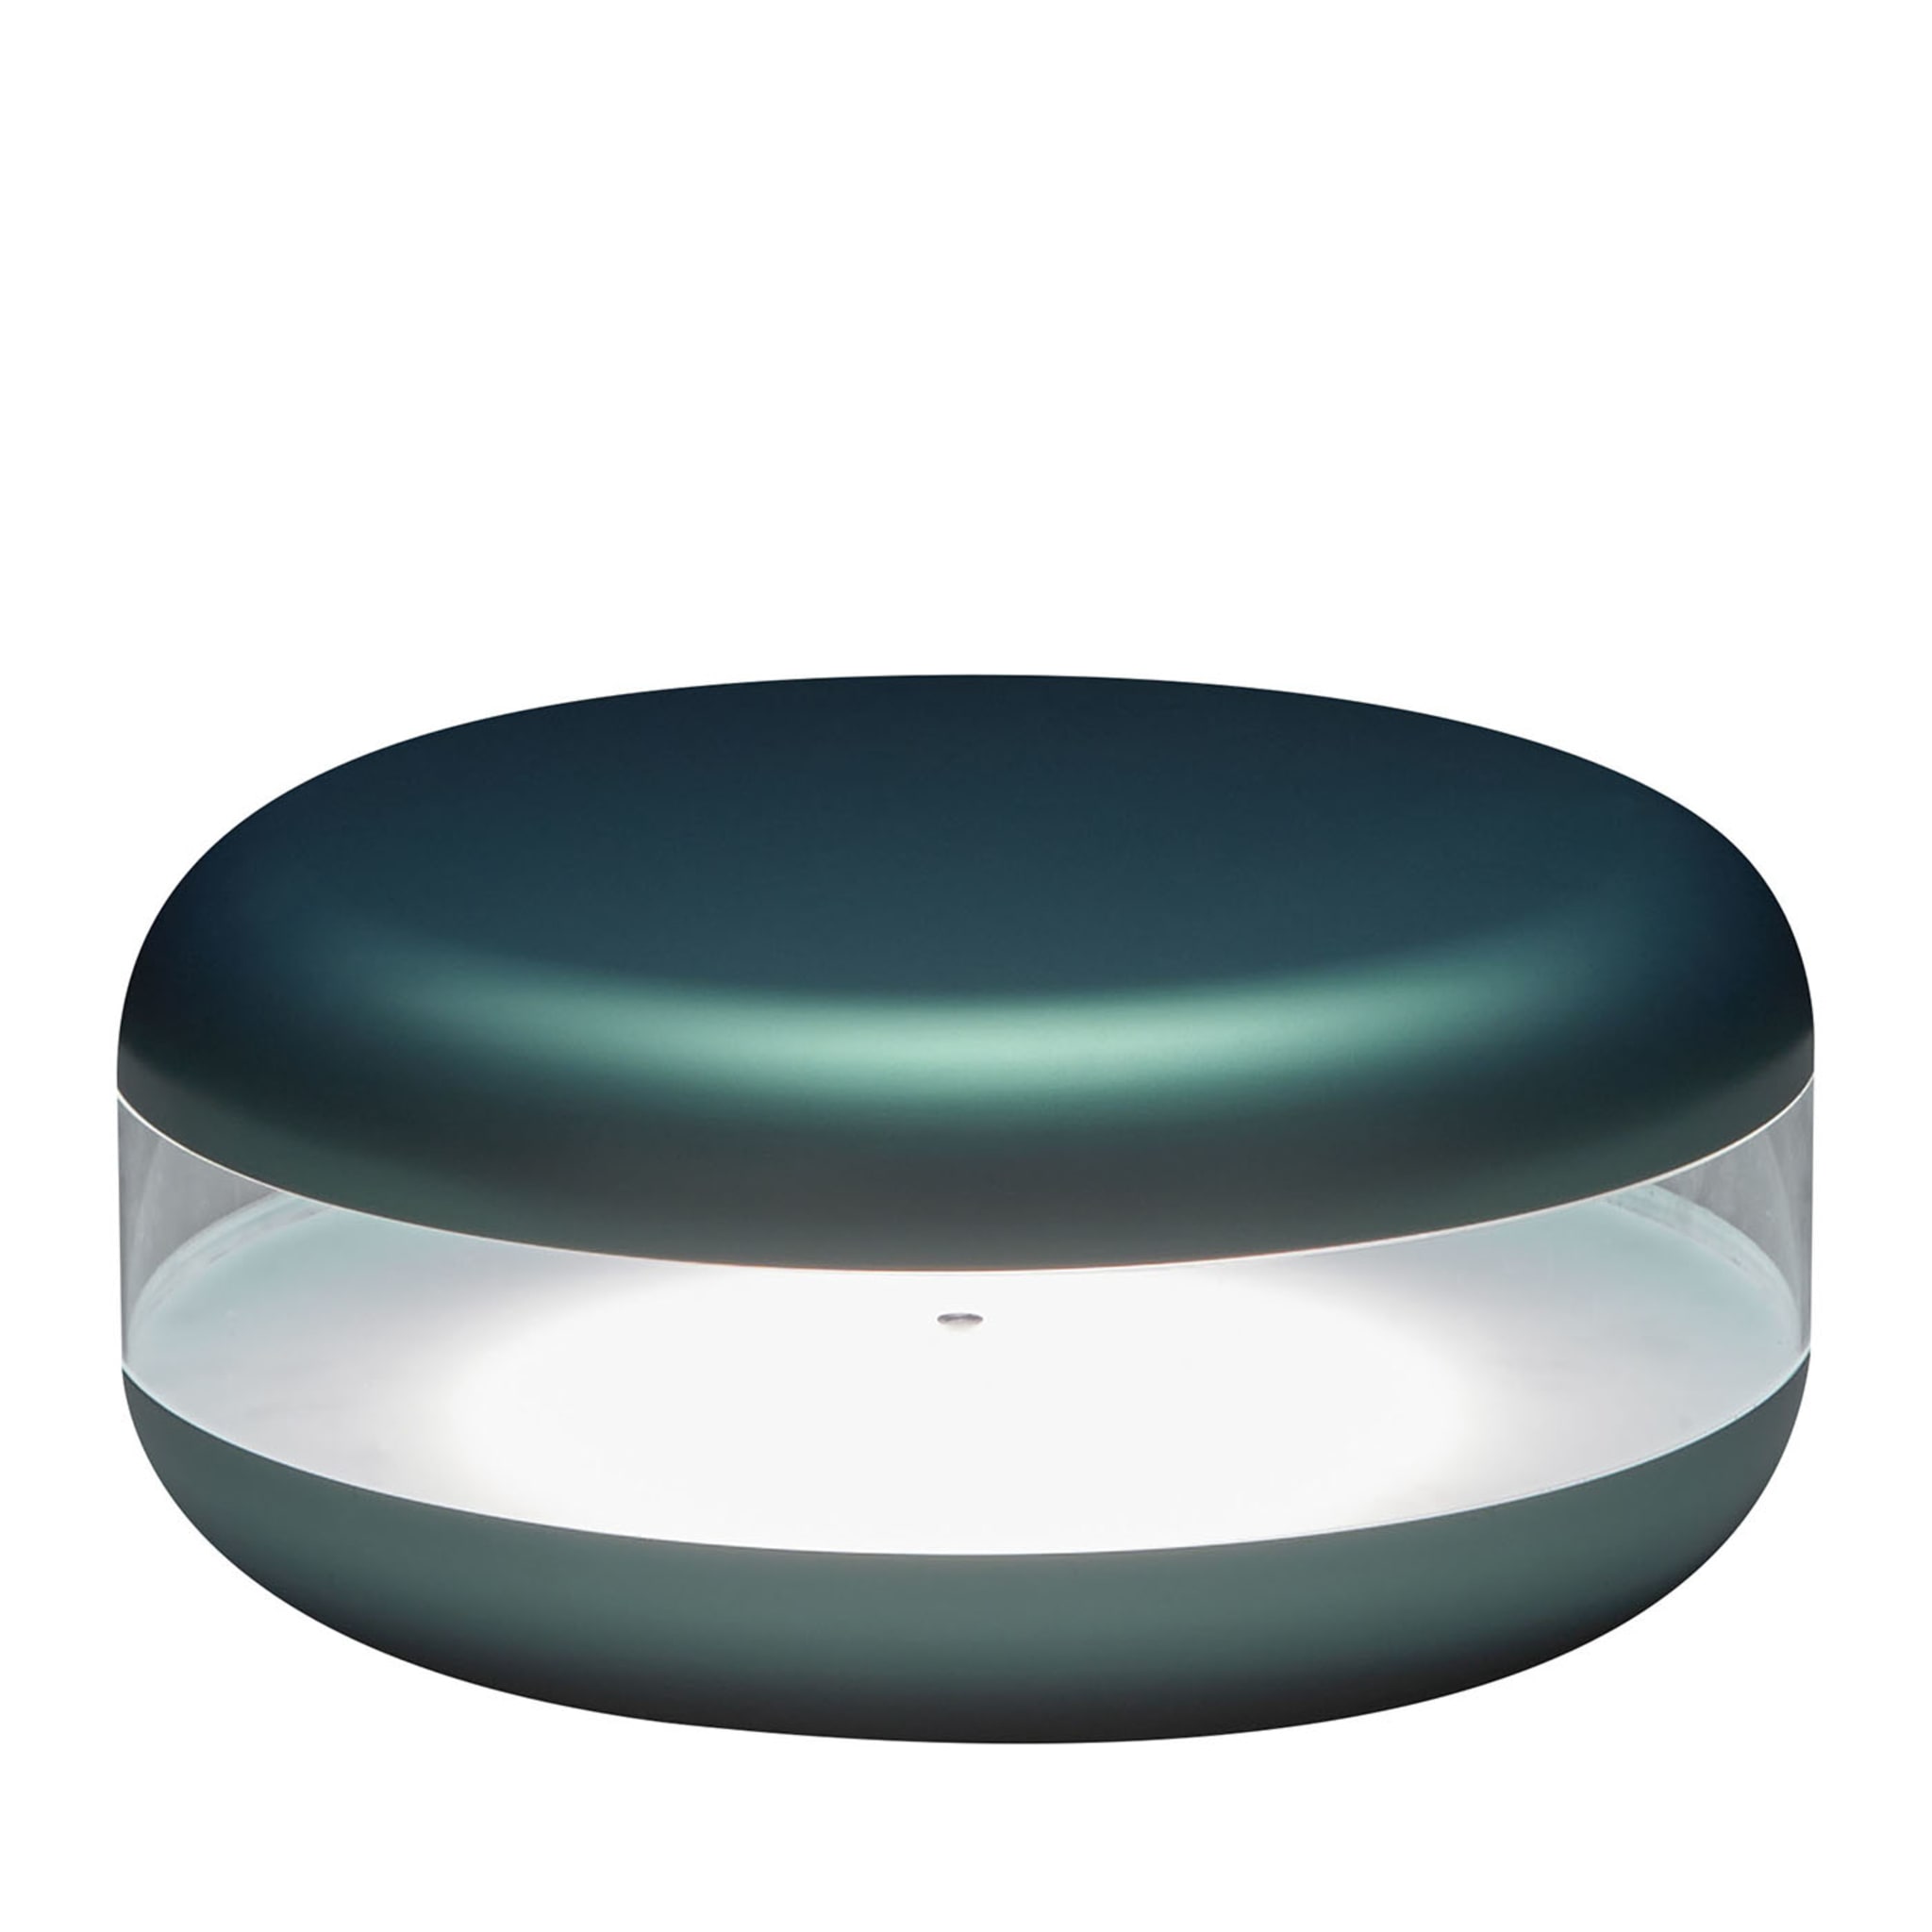 Macaron Green Table Lamp by Parisotto + Formenton - Main view